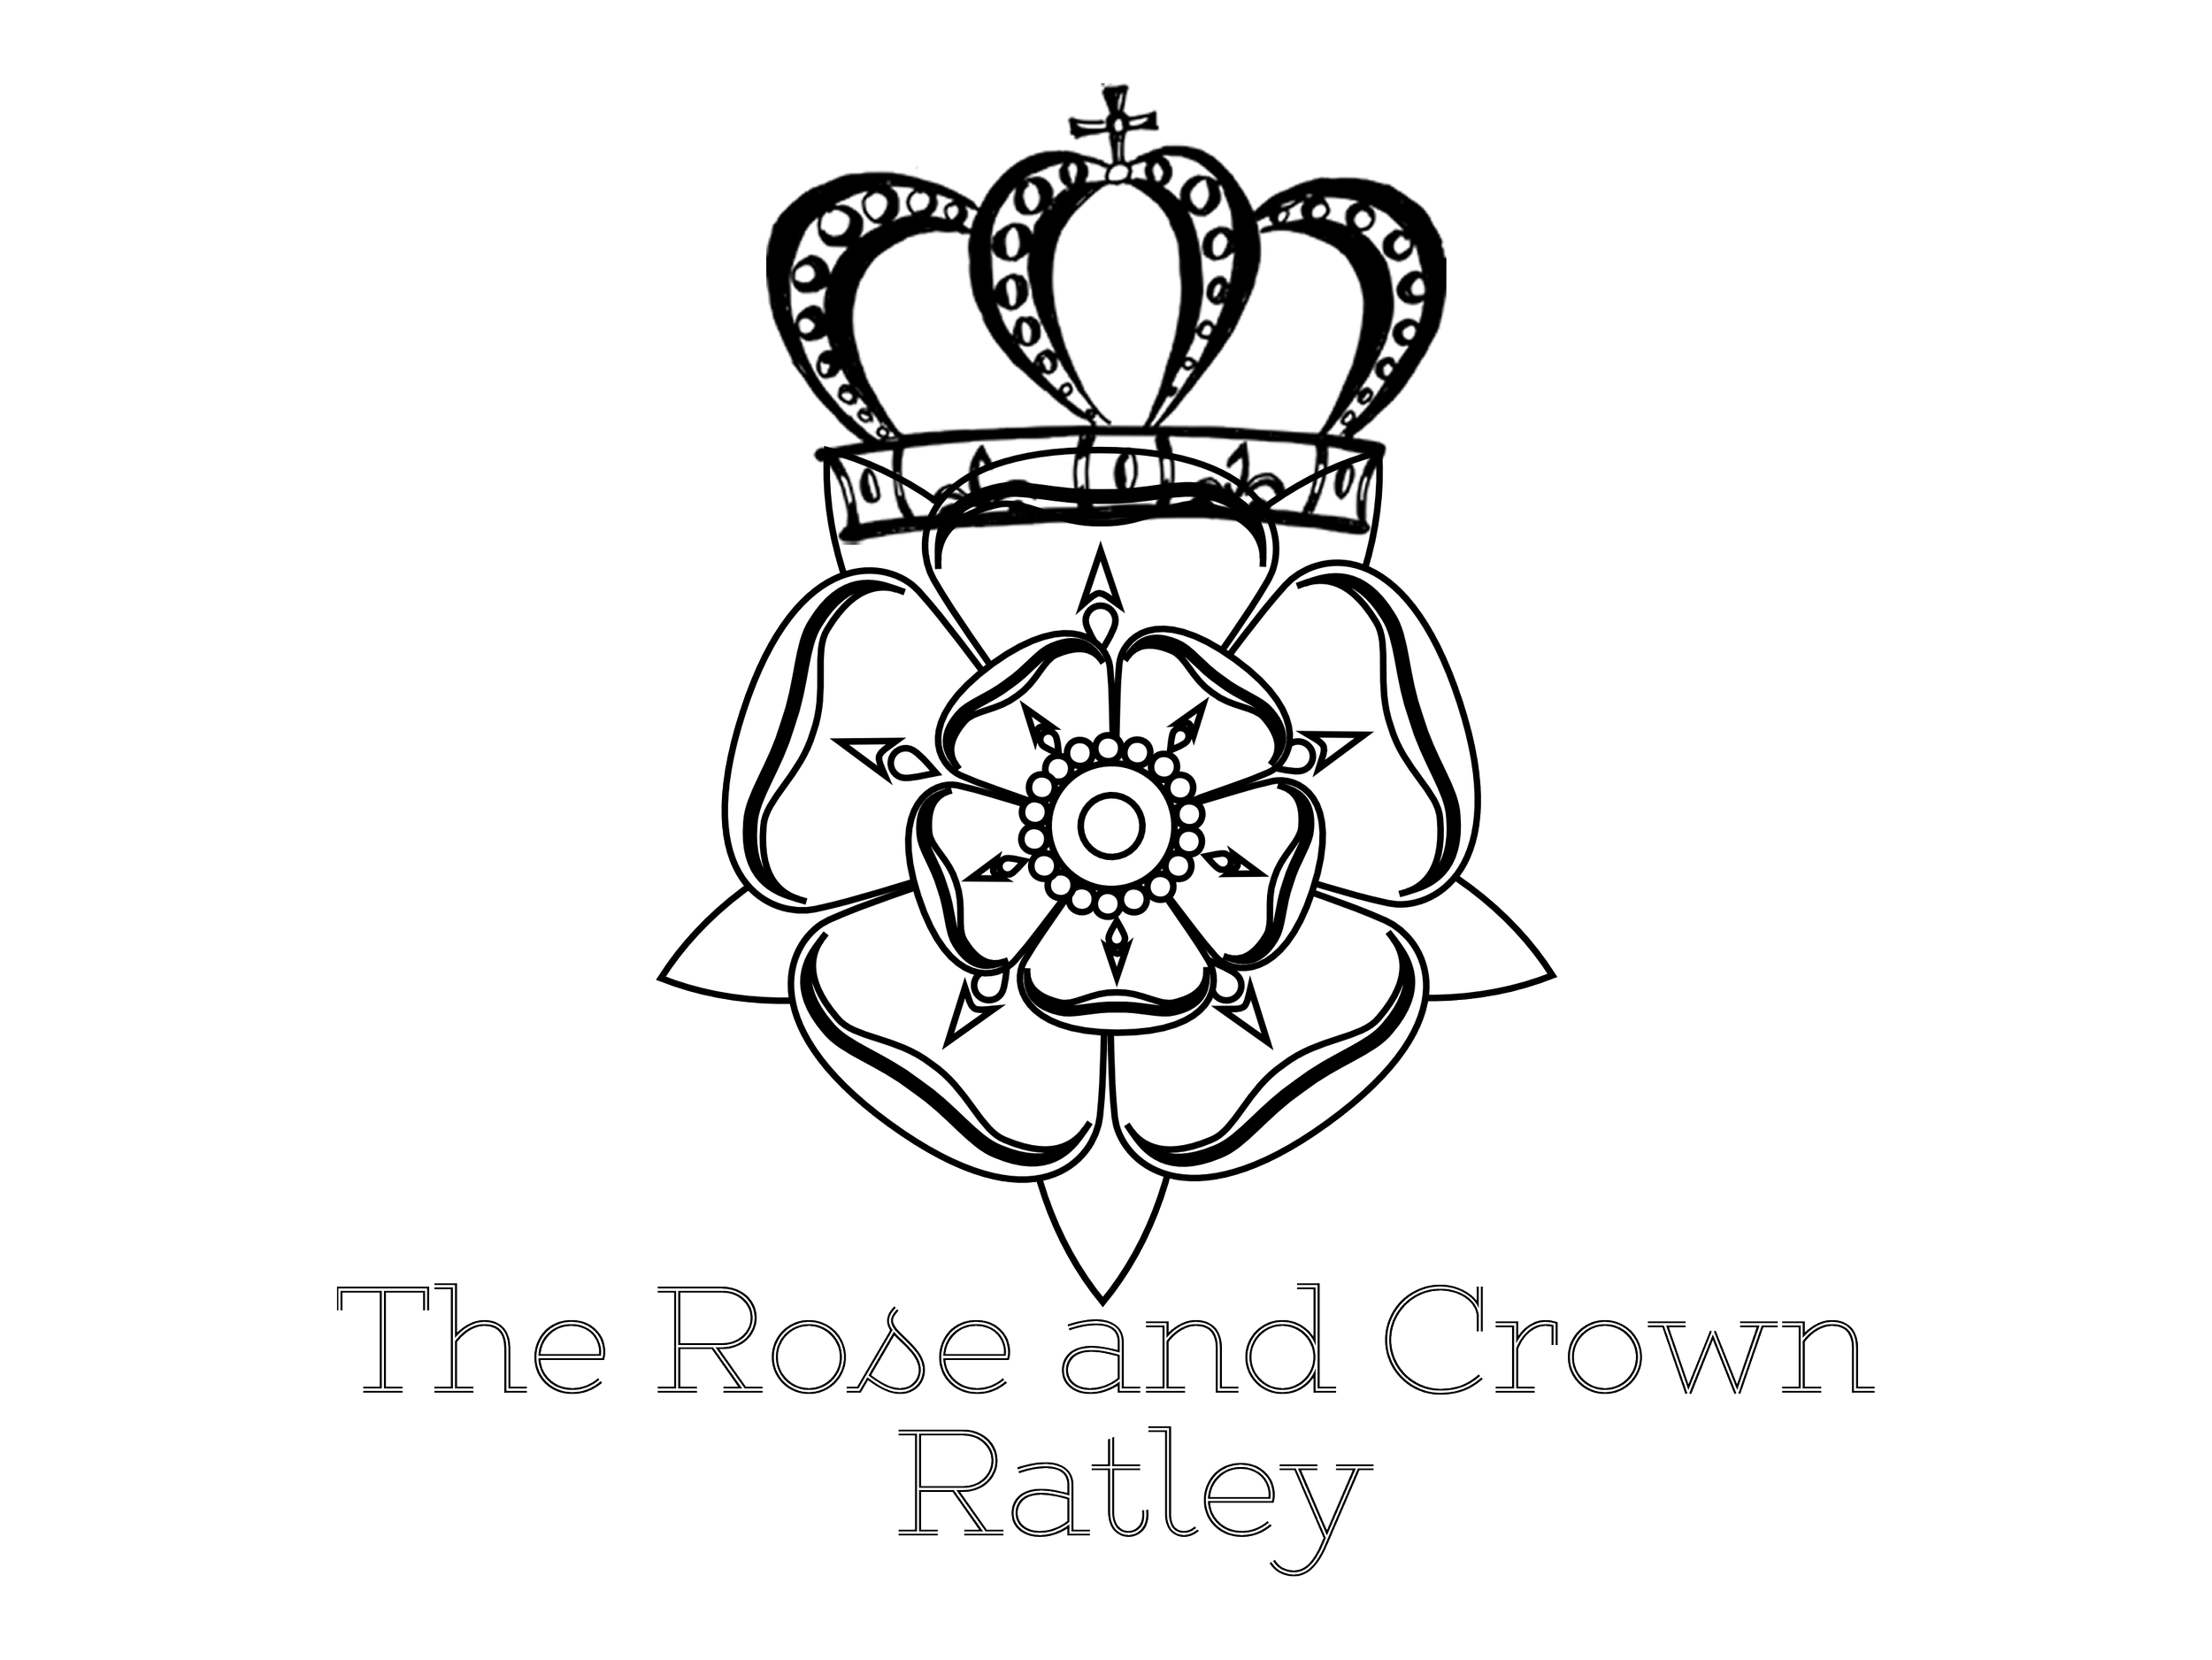 The Rose & Crown Ratley